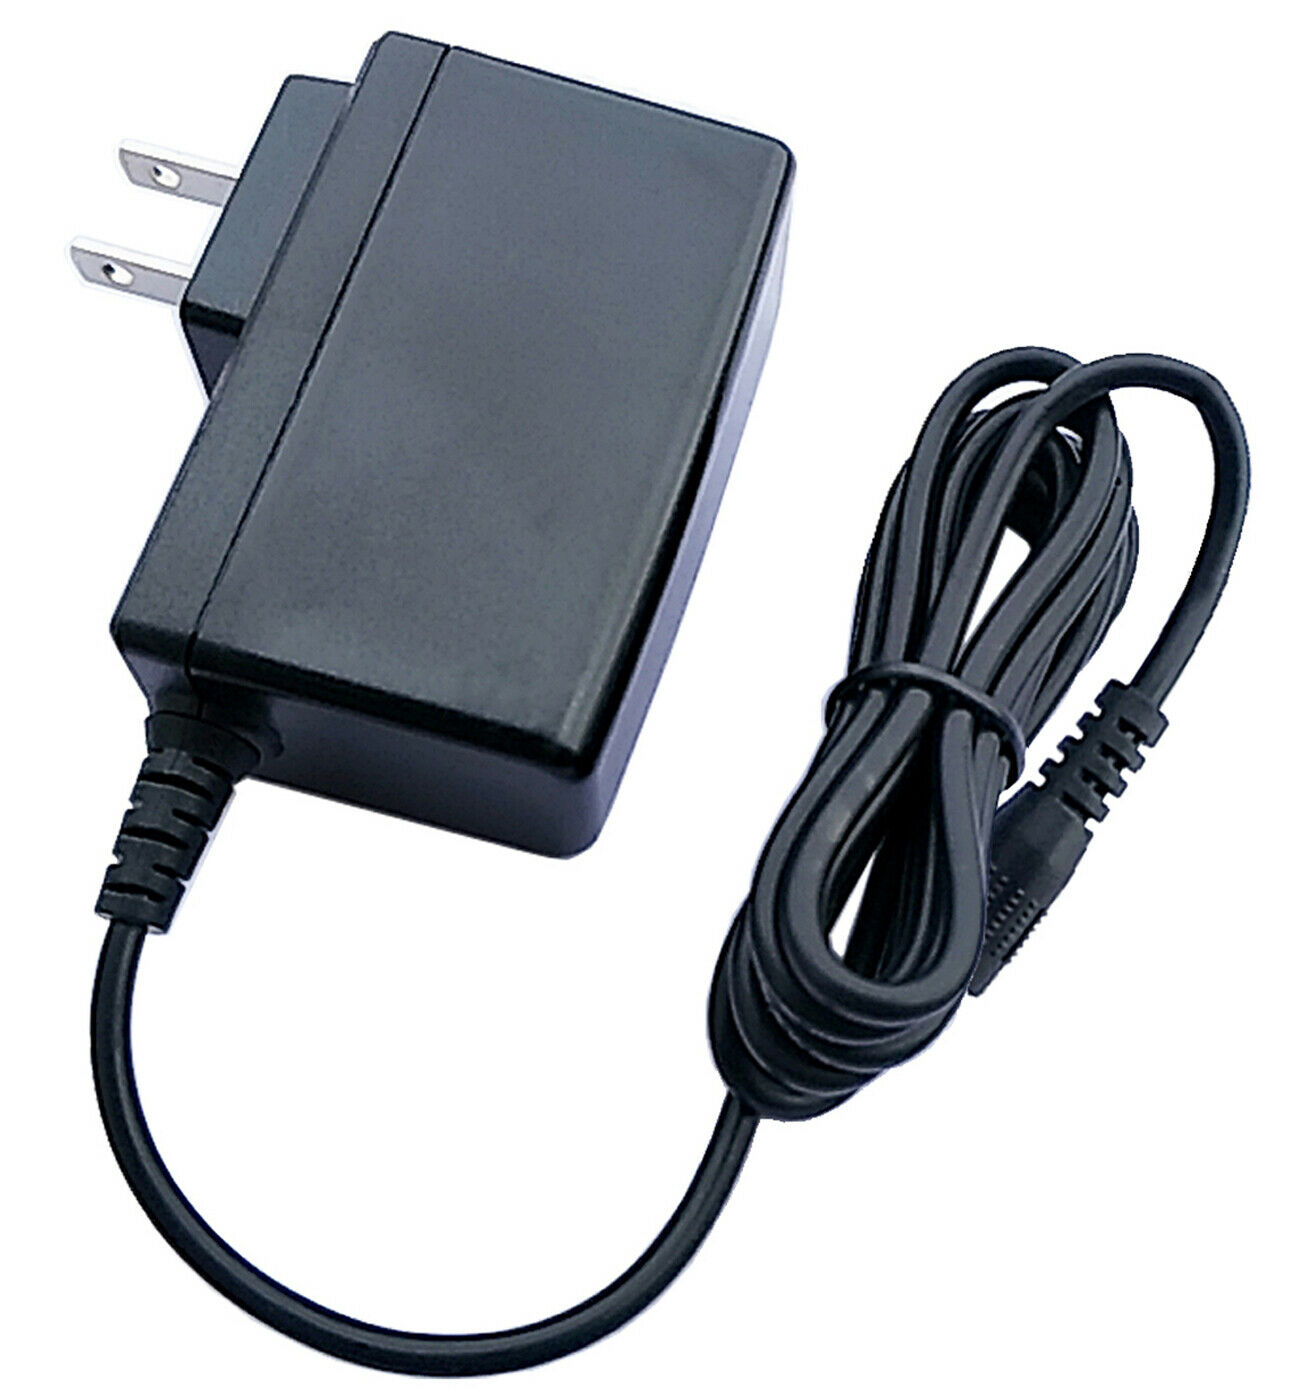 AC/DC Adapter For Motorola Symbol DS3578 DS 3578 Series Barcode Scanner Charger Technical Specifications: 1 AC input vo - Click Image to Close